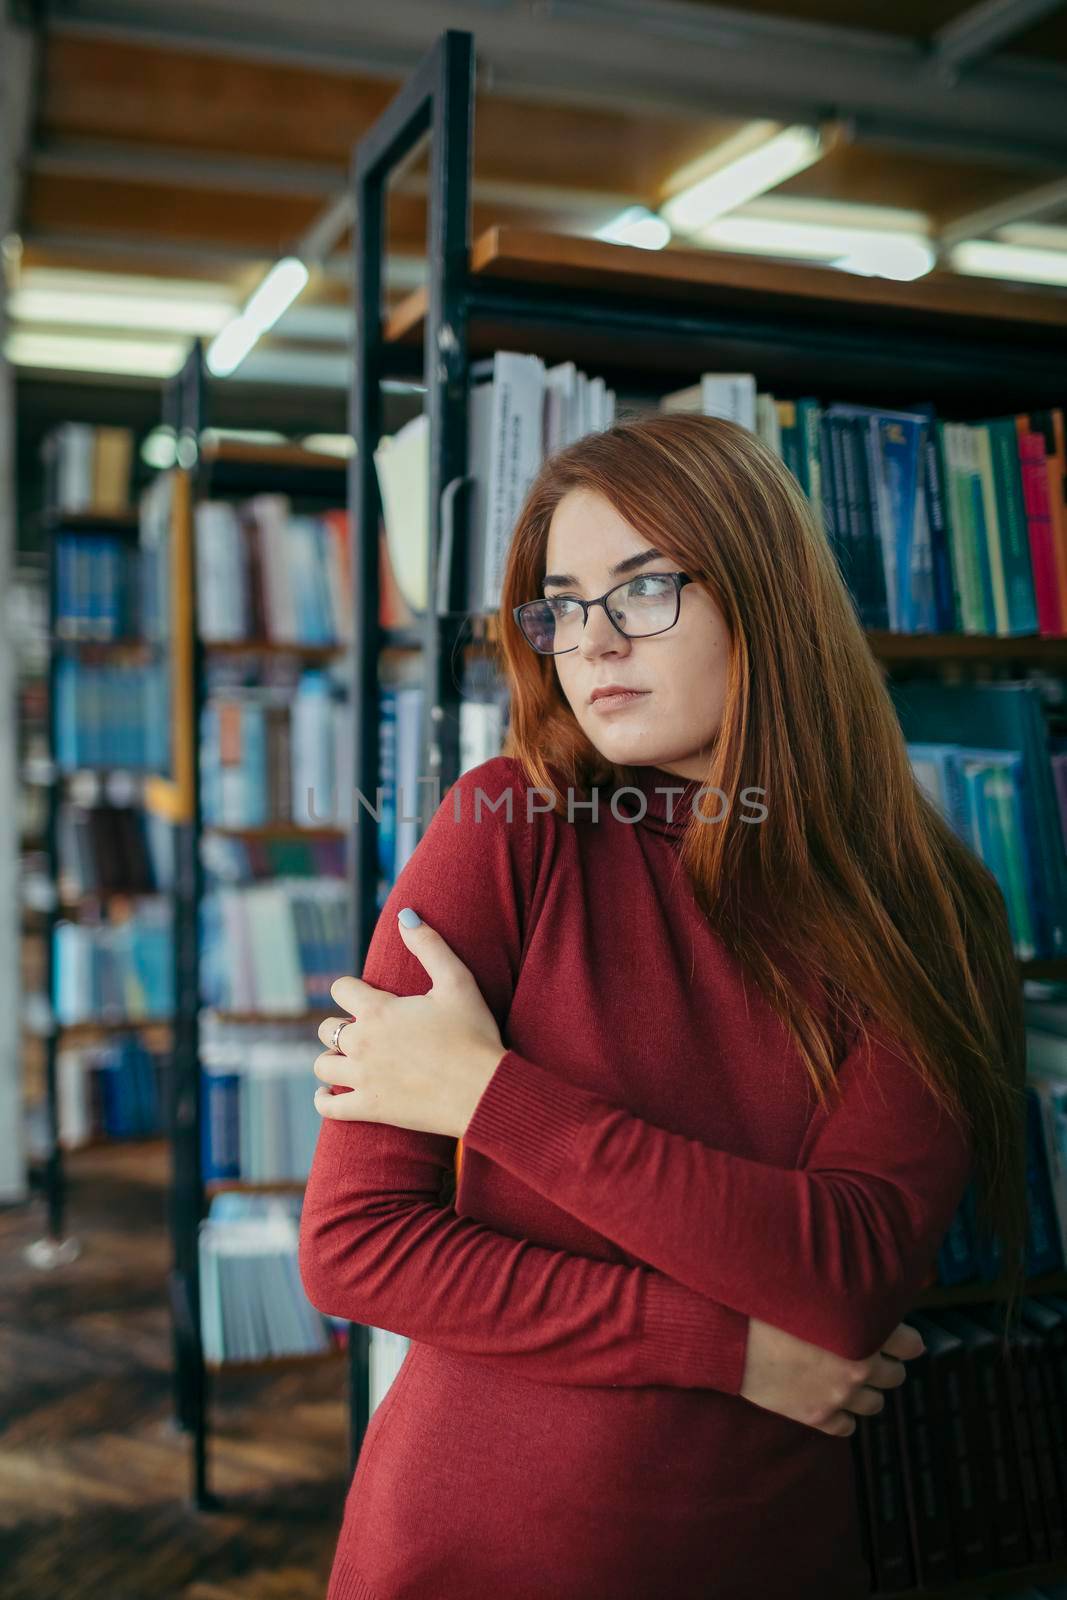 A girl holding a book shelf, student in the library by Dmytro125